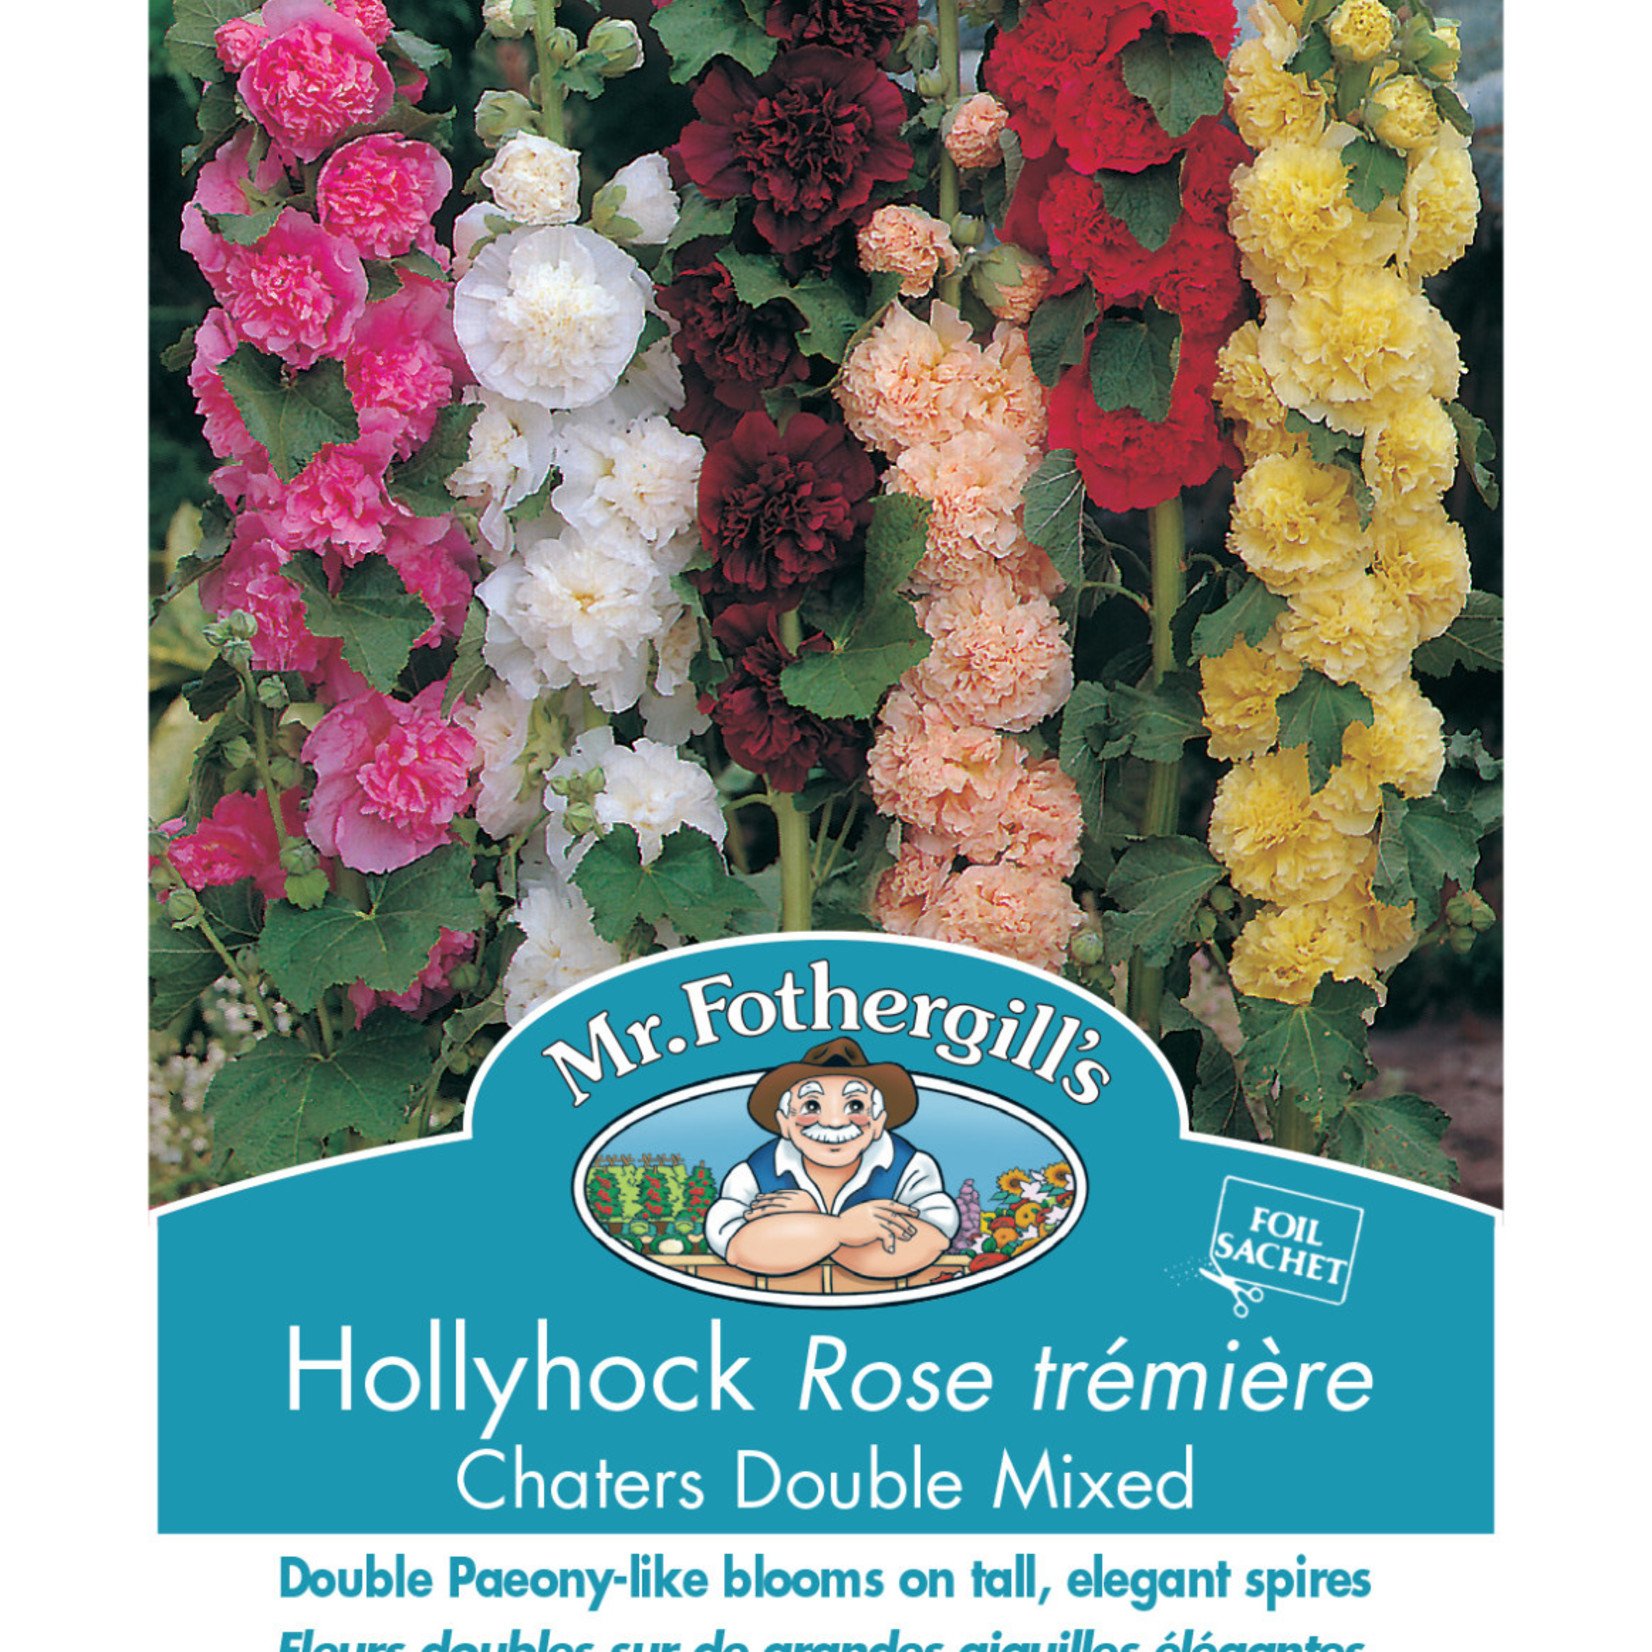 Mr. Fothergill's HOLLYHOCK Chaters Double Mixed